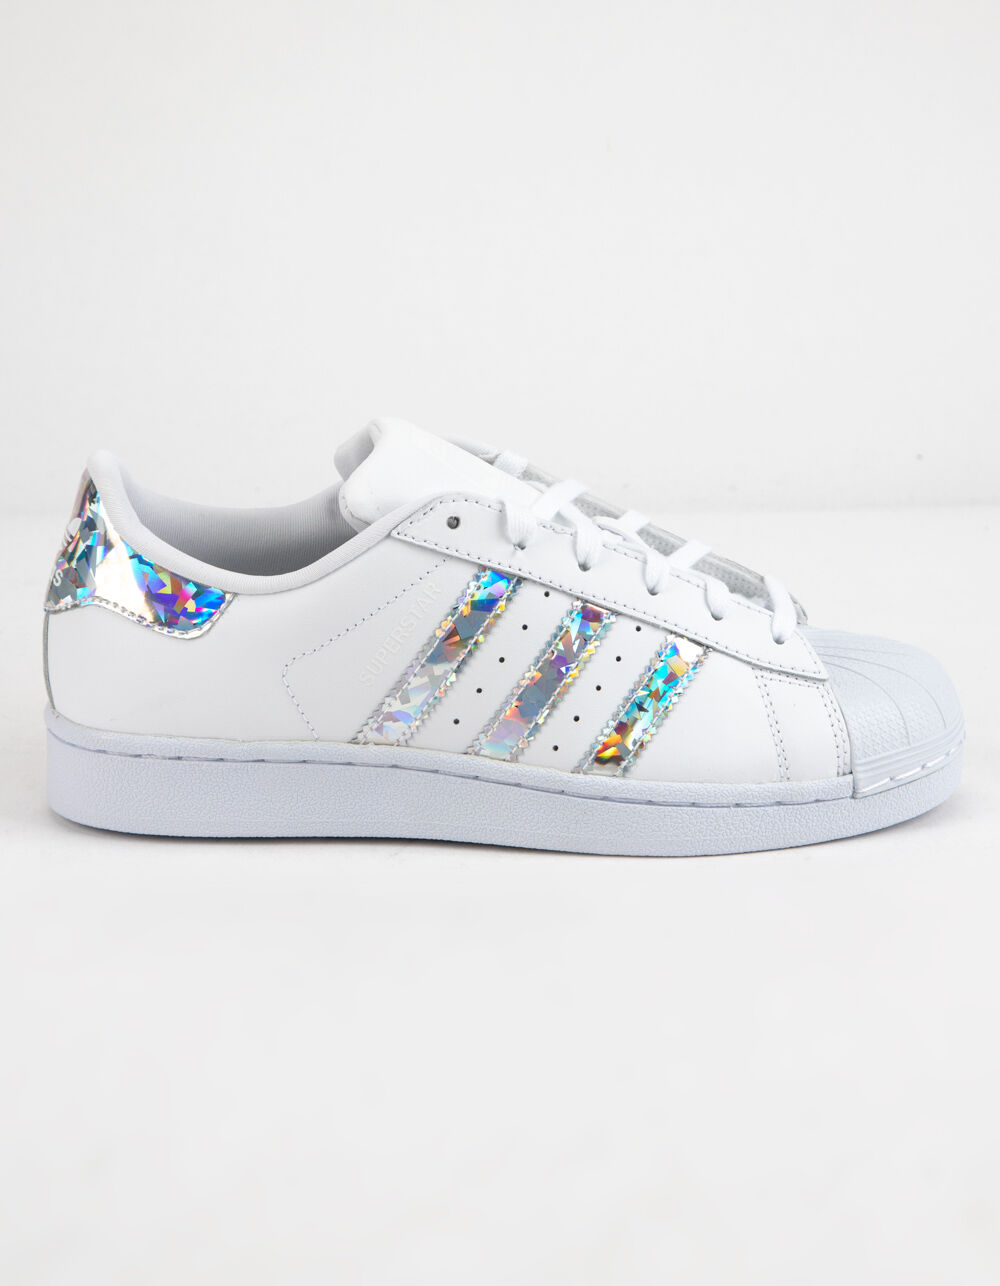 combustible estera kiwi ADIDAS Superstar Holographic Girls Shoes - WHITE/SILVER | Tillys